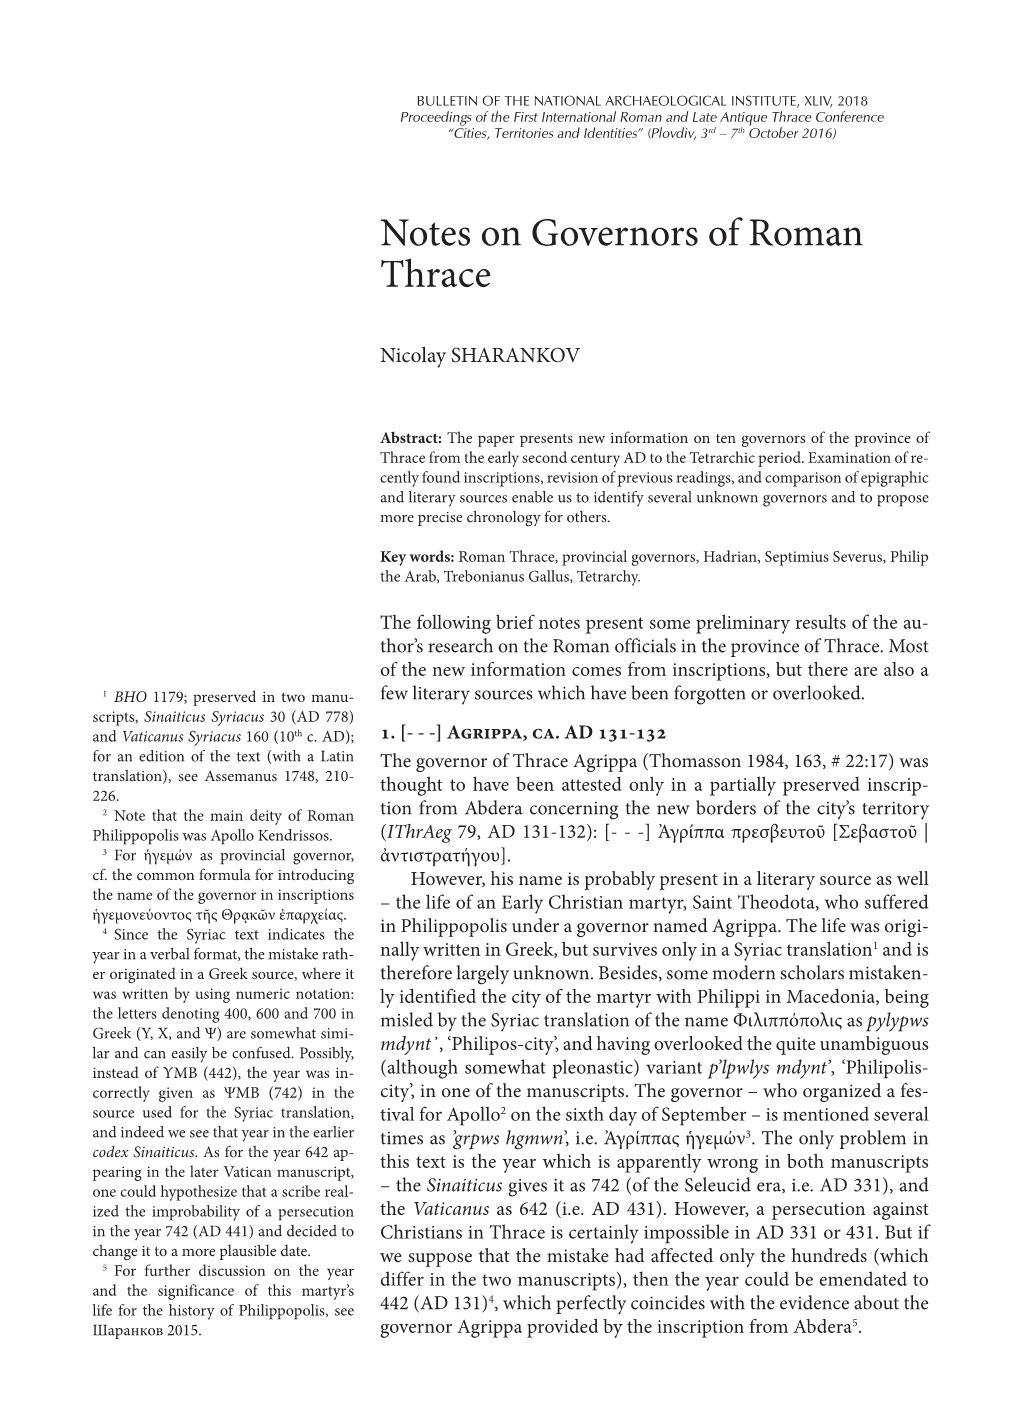 Notes on Governors of Roman Thrace